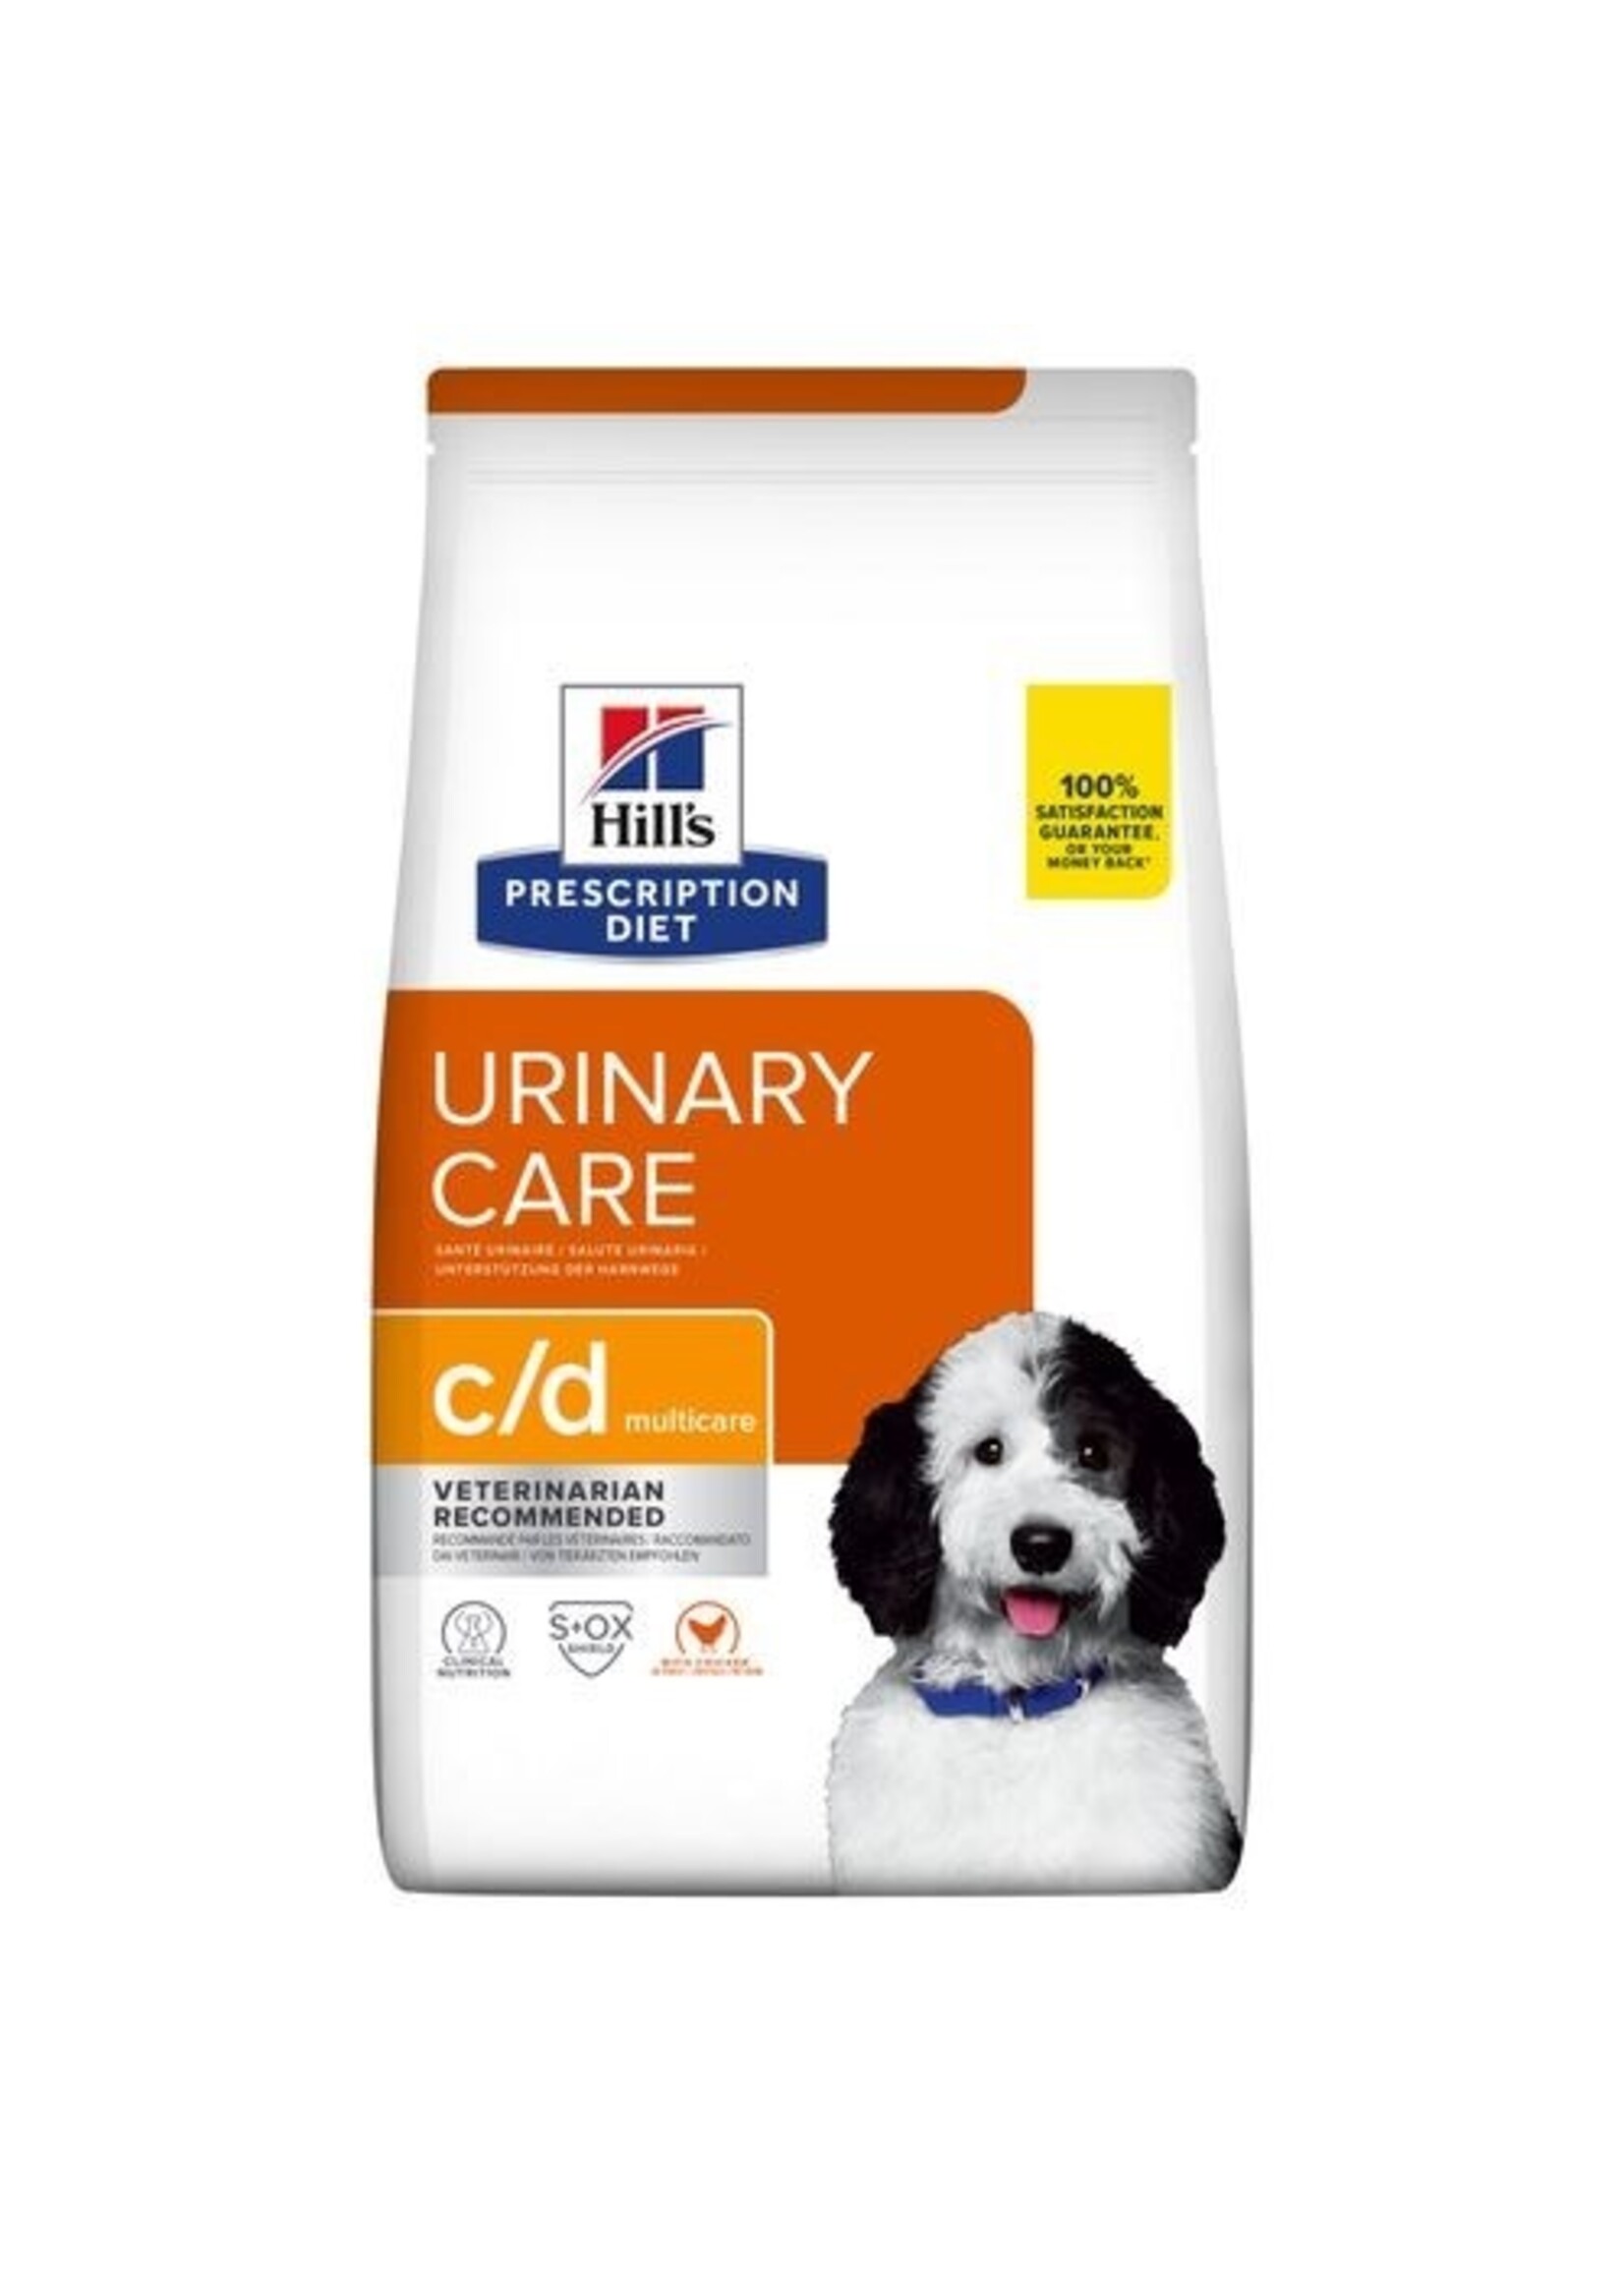 Hill's Hill's c/d Urinary Care Dog 4kg